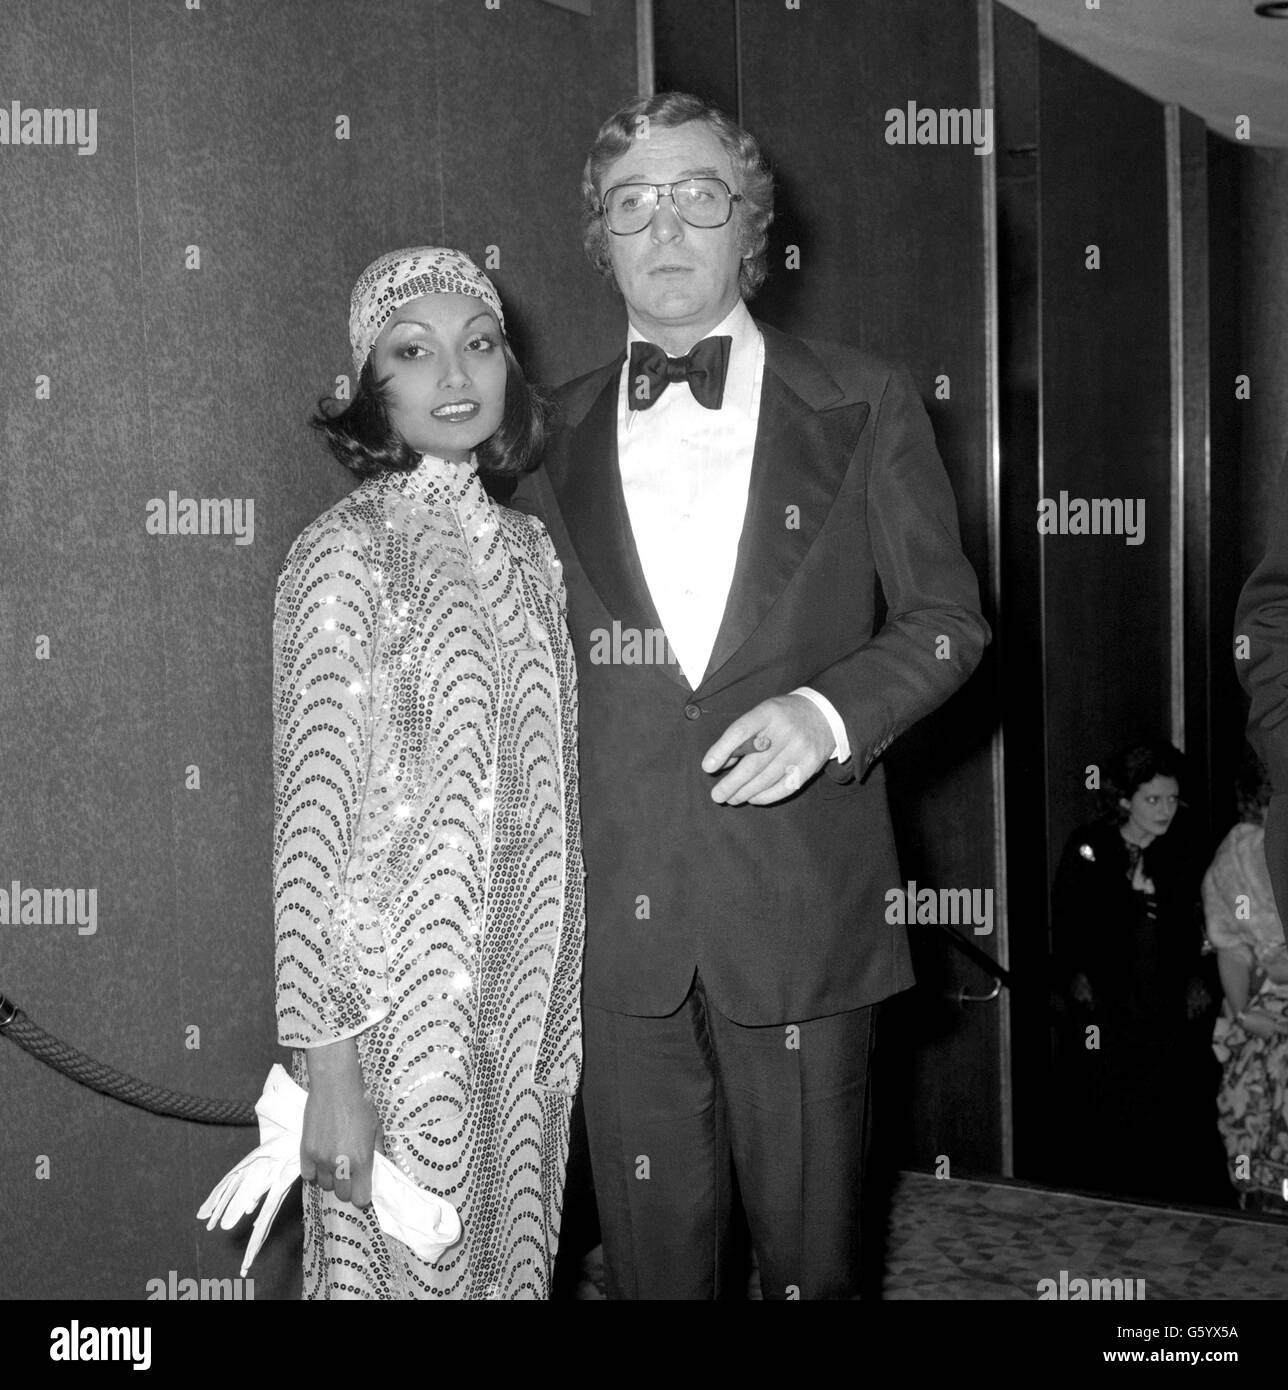 Actor Michael Caine with his wife Shakira arrive for the premiere of his latest film ''The Man Who Would be King'. Stock Photo